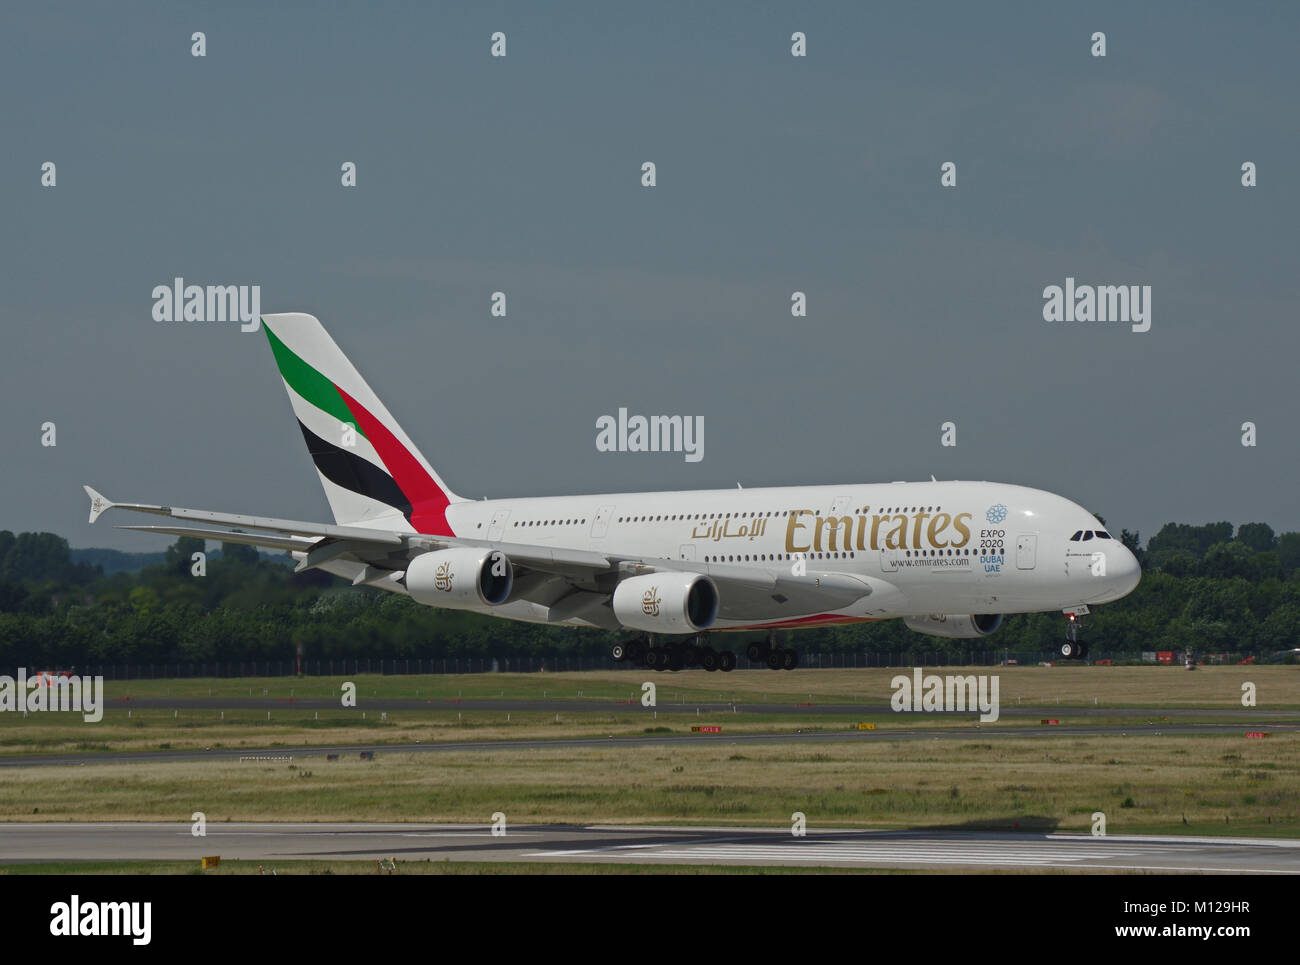 DUESSELDORF, GERMANY - JULY 1, 2015: Inaugural flight of Emirates Airline with Airbus A380-800 from Dubai to Duesseldorf while final approach Stock Photo